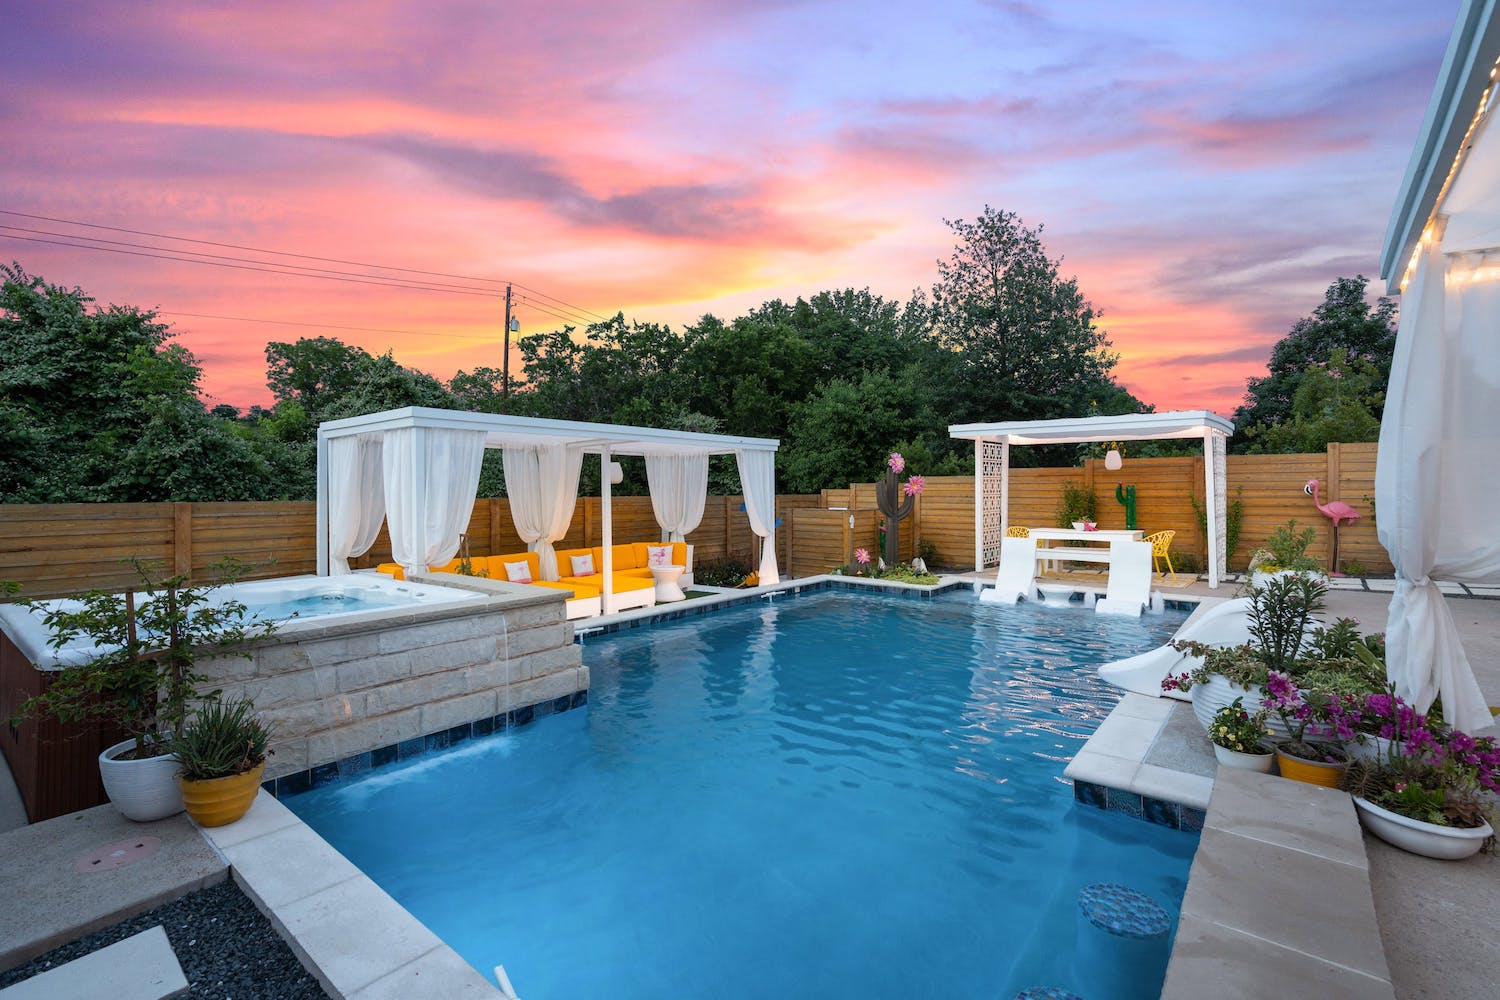 Pool at sunset with cabanas, couches, a hot tub and chairs